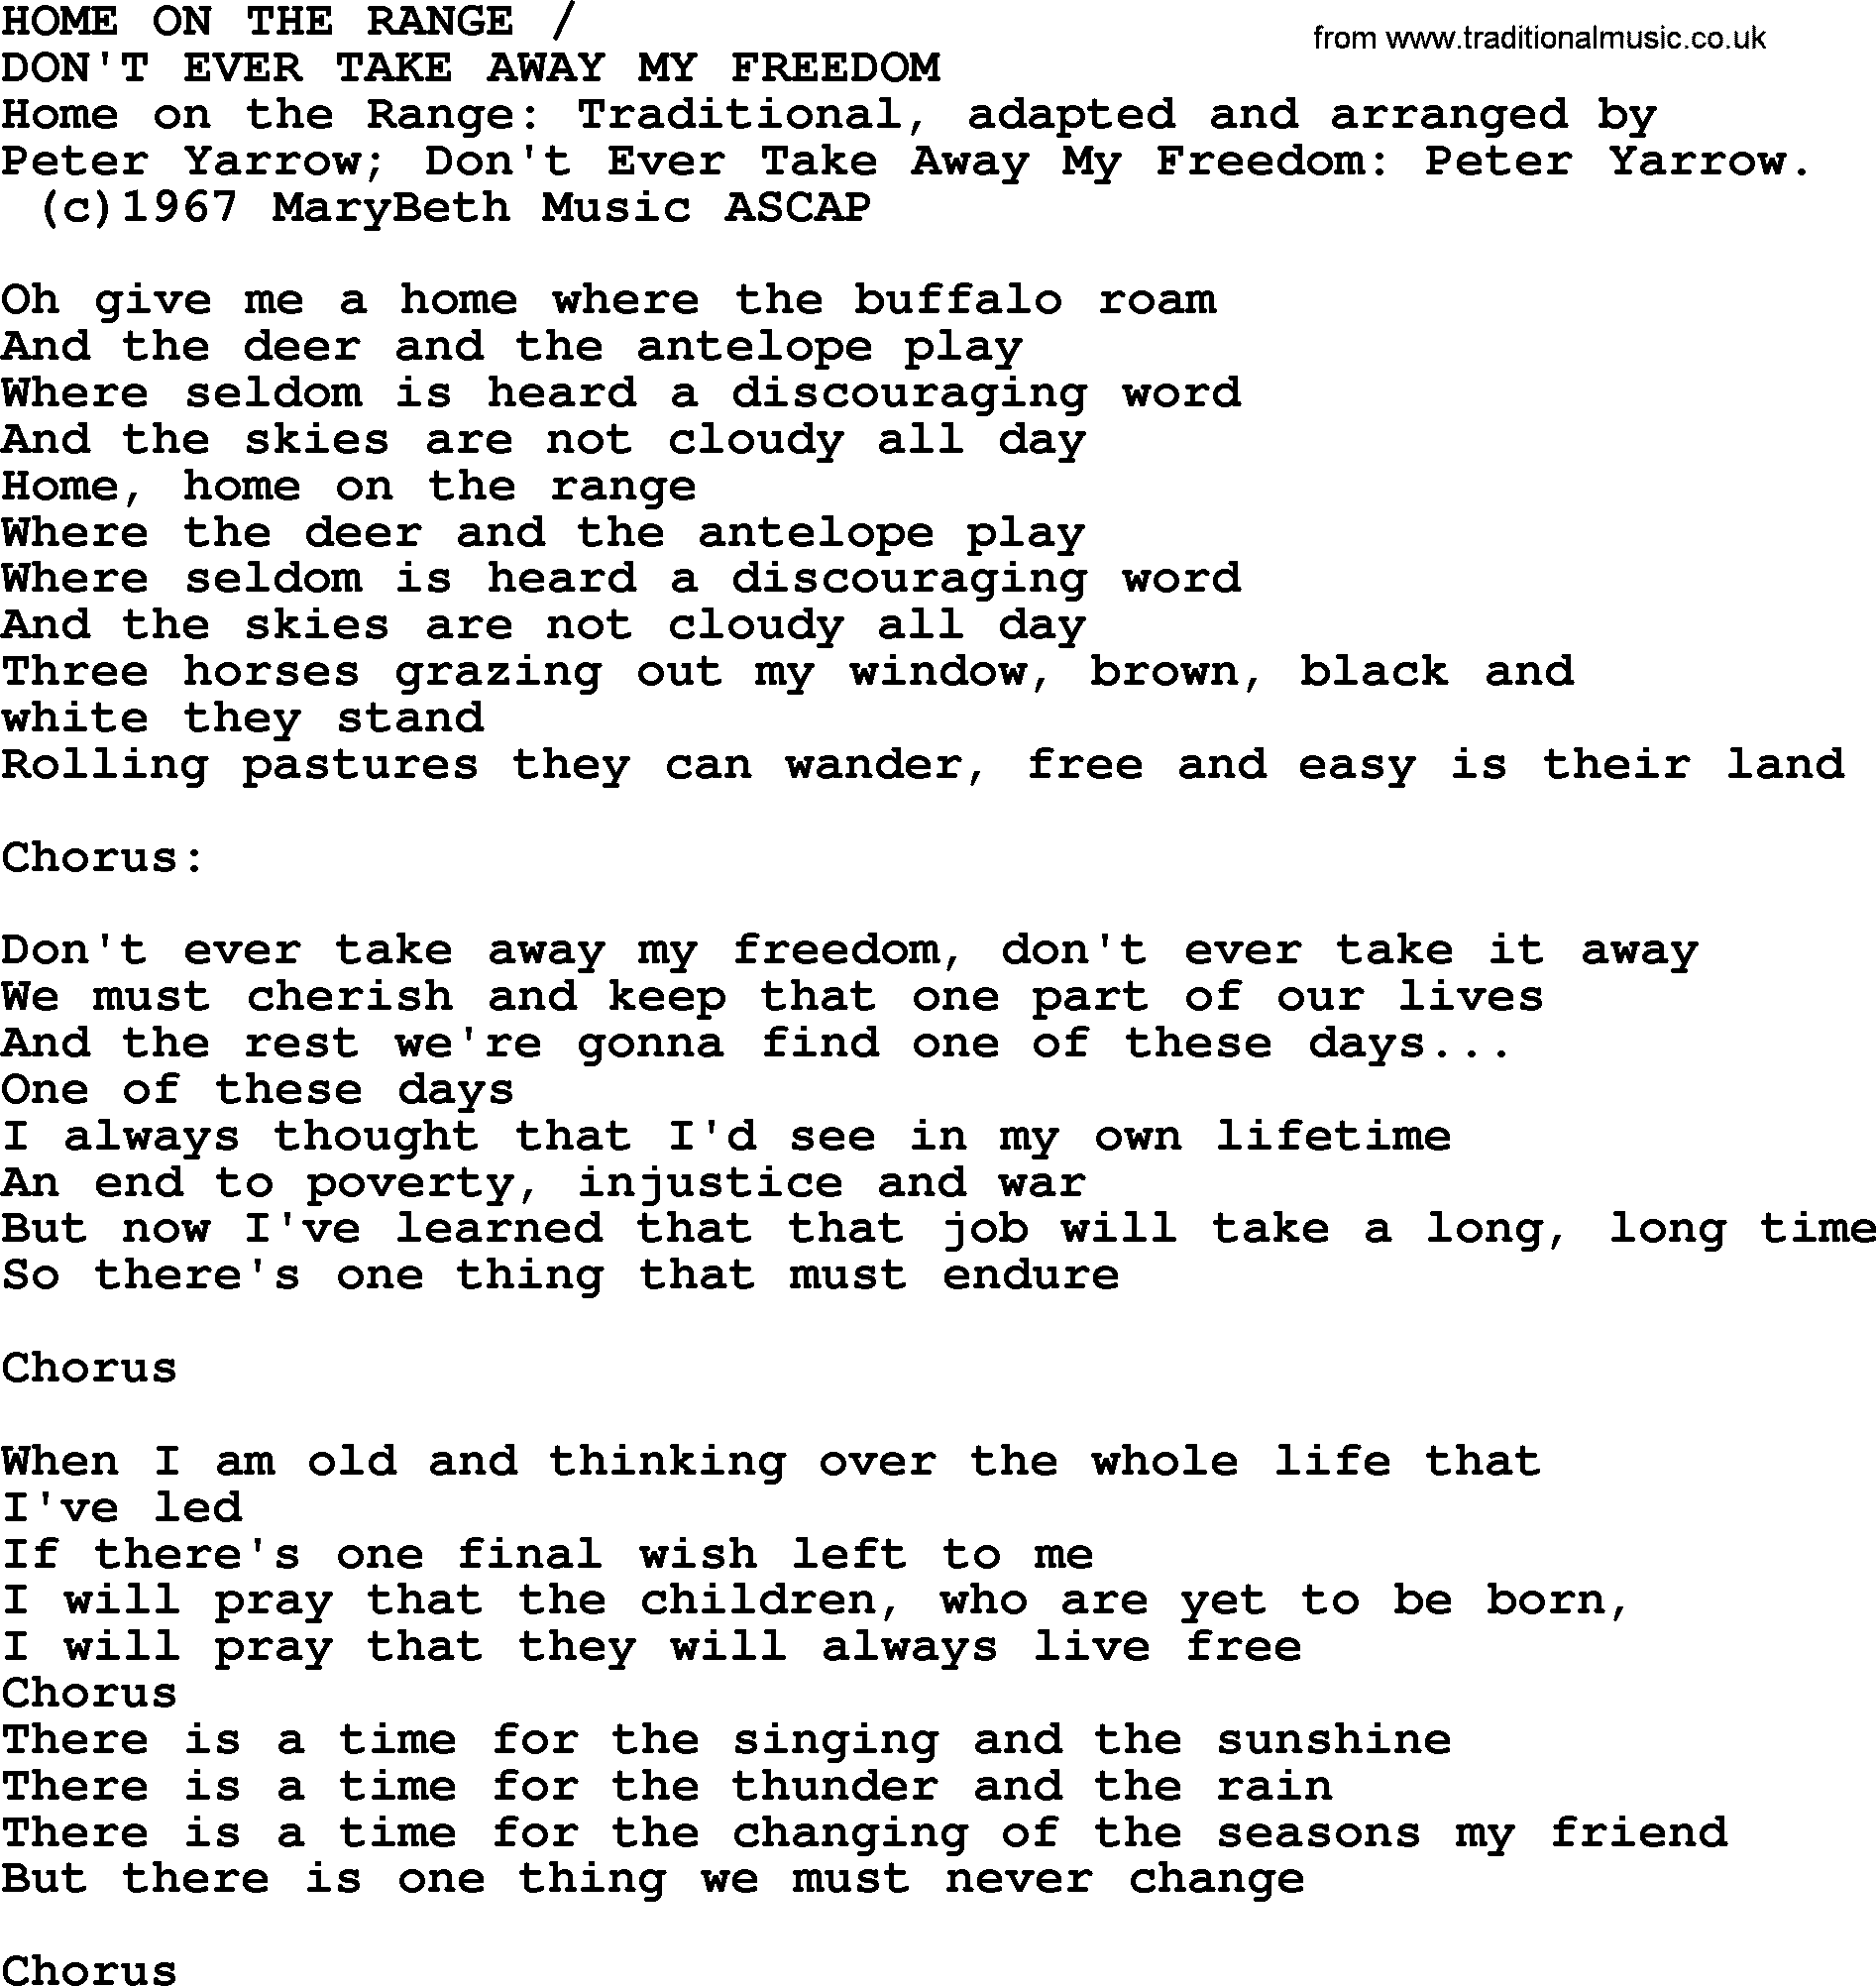 Peter, Paul and Mary song Home On The Range  lyrics